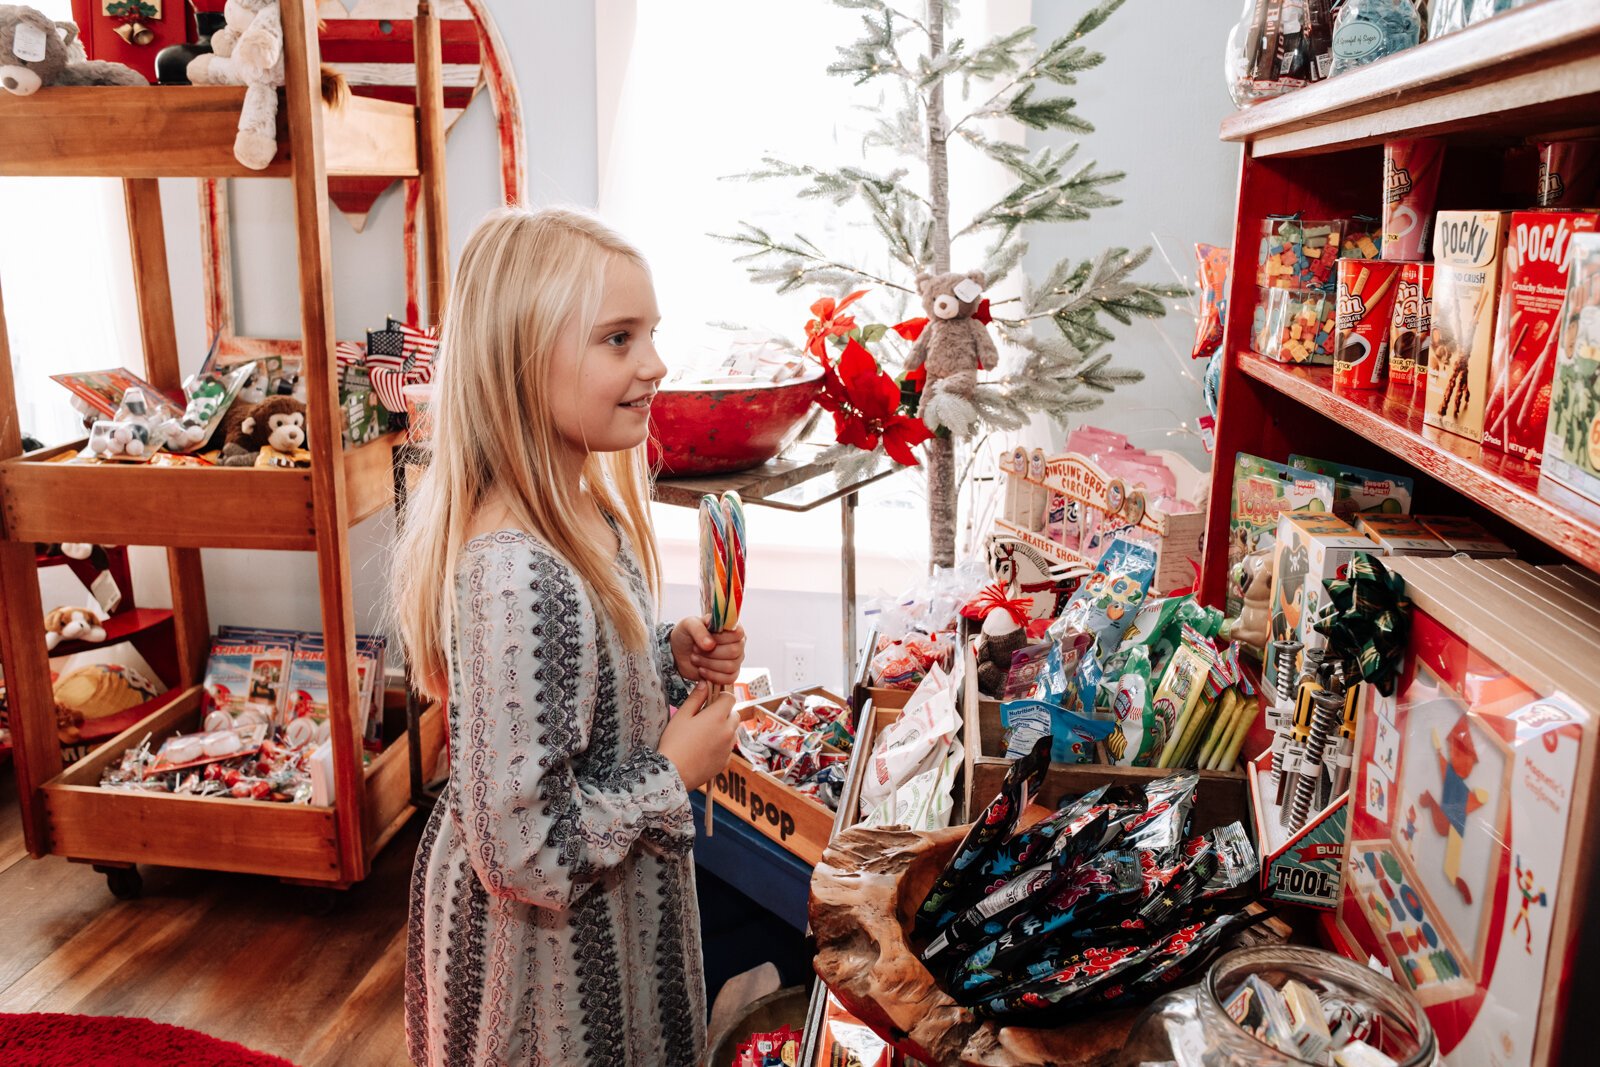  Finley Wretling, 9, looks for presents for friends and parents at Spoonful of Sugar in Roanoke.